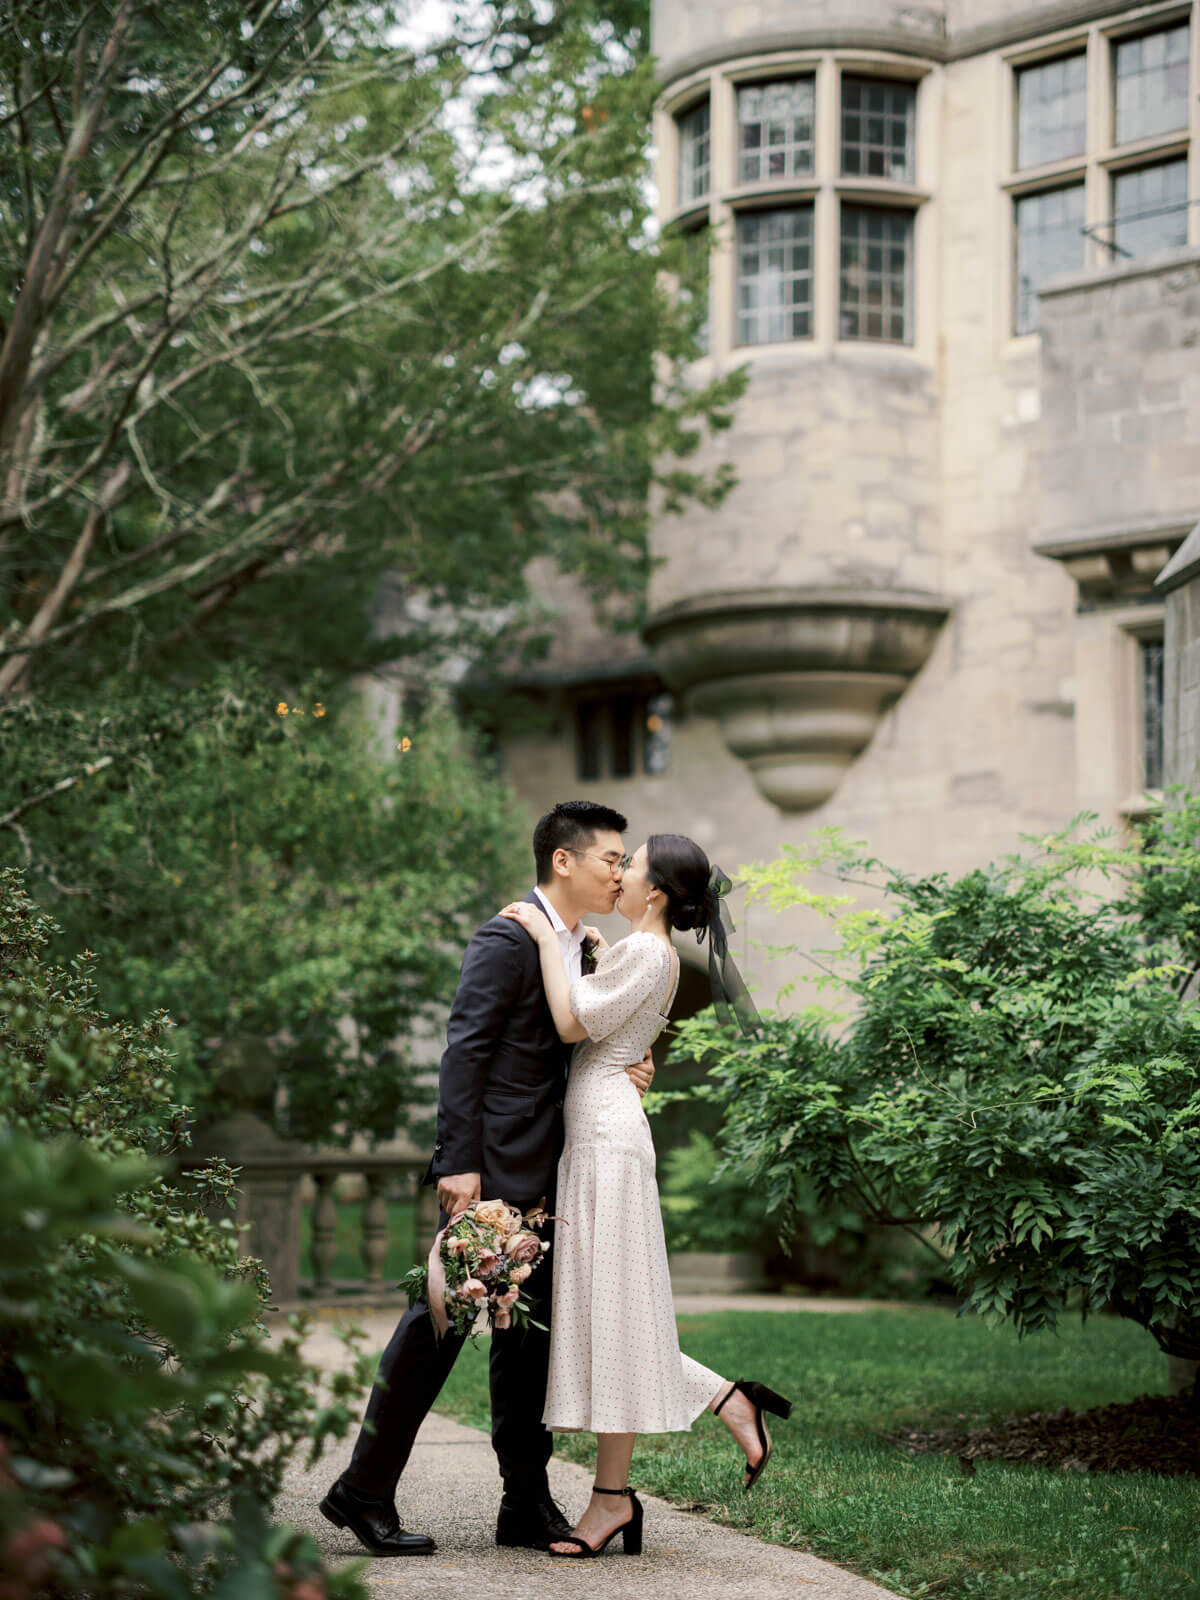 The engaged couple is kissing outside Coe Hall at Planting Fields Arboretum, NY, with lush trees on the side. Image by Jenny Fu Studio